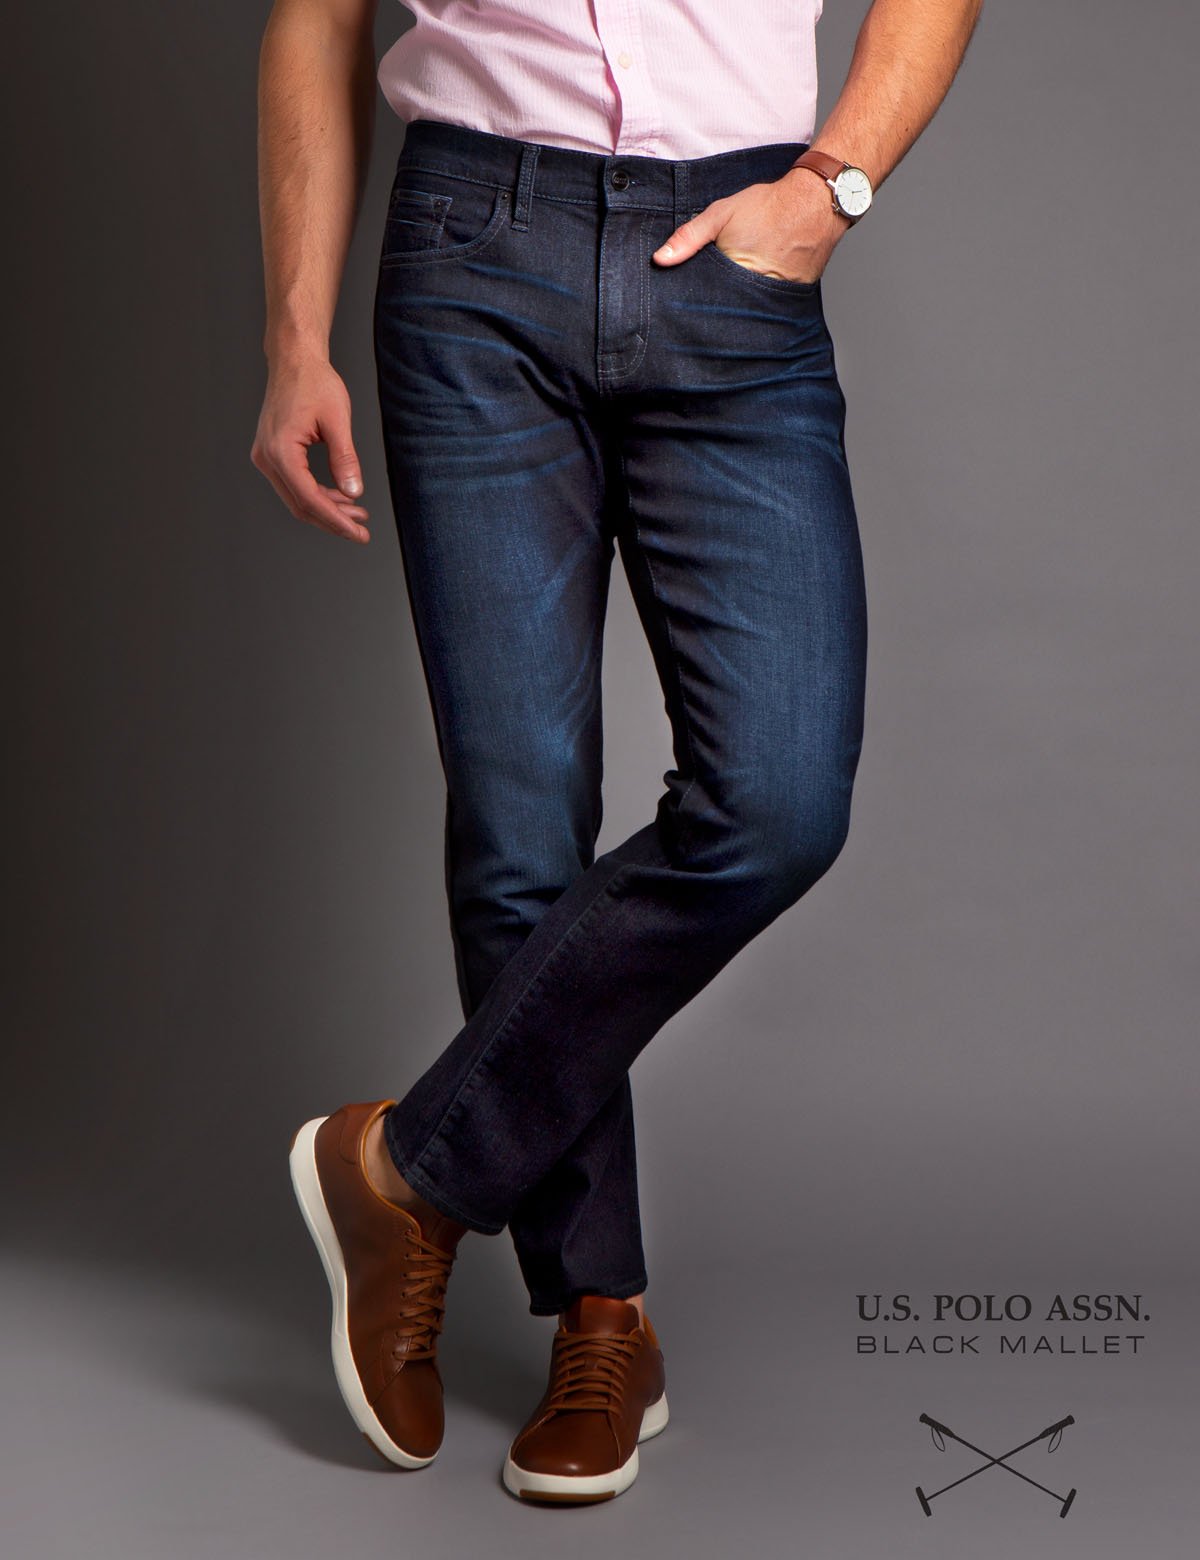 polo jeans shoes